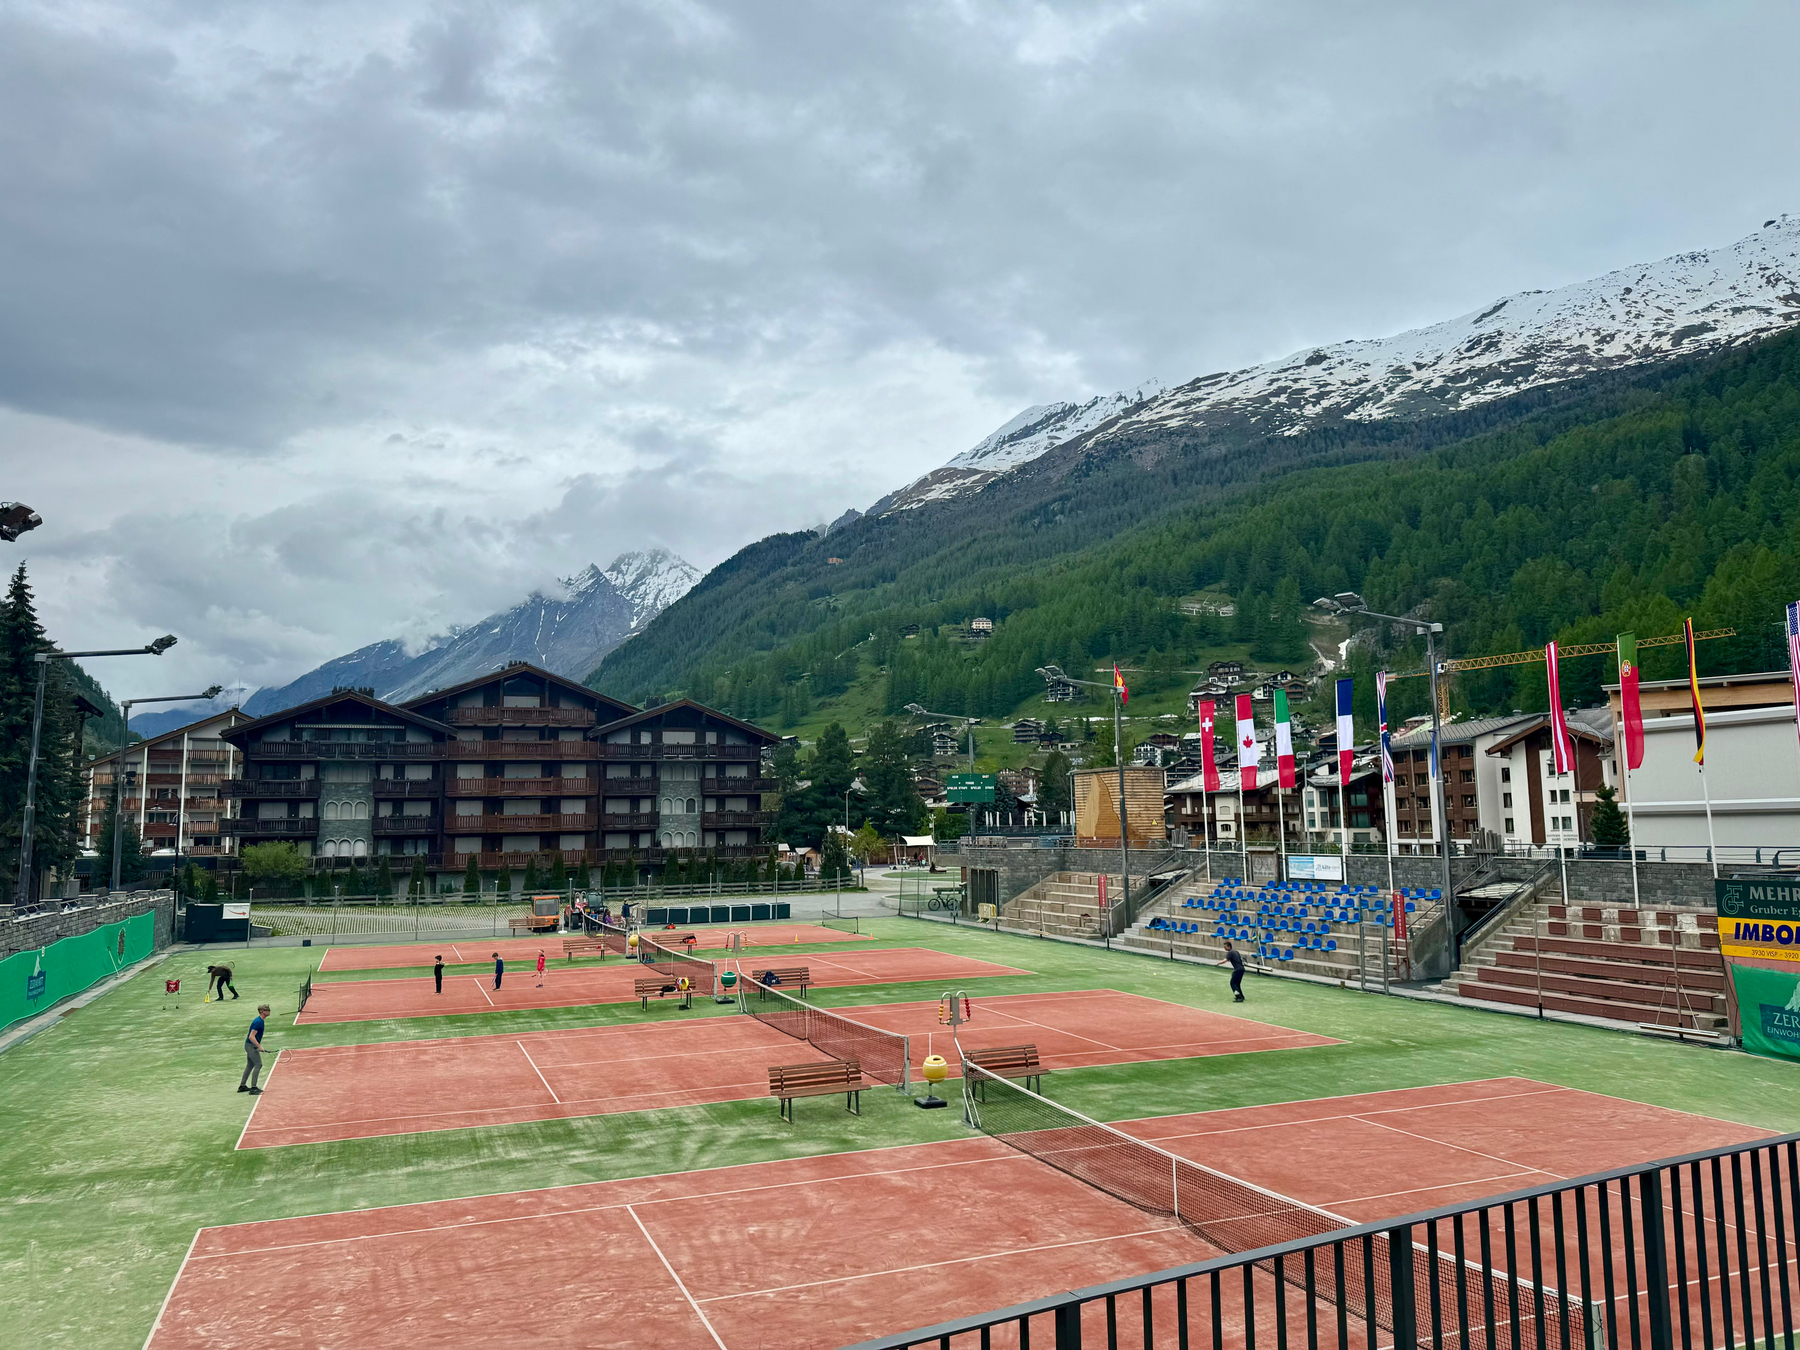 A tennis court in a mountainous region with players on the court, surrounded by buildings and trees, with snow-capped mountains in the background and various international flags displayed.